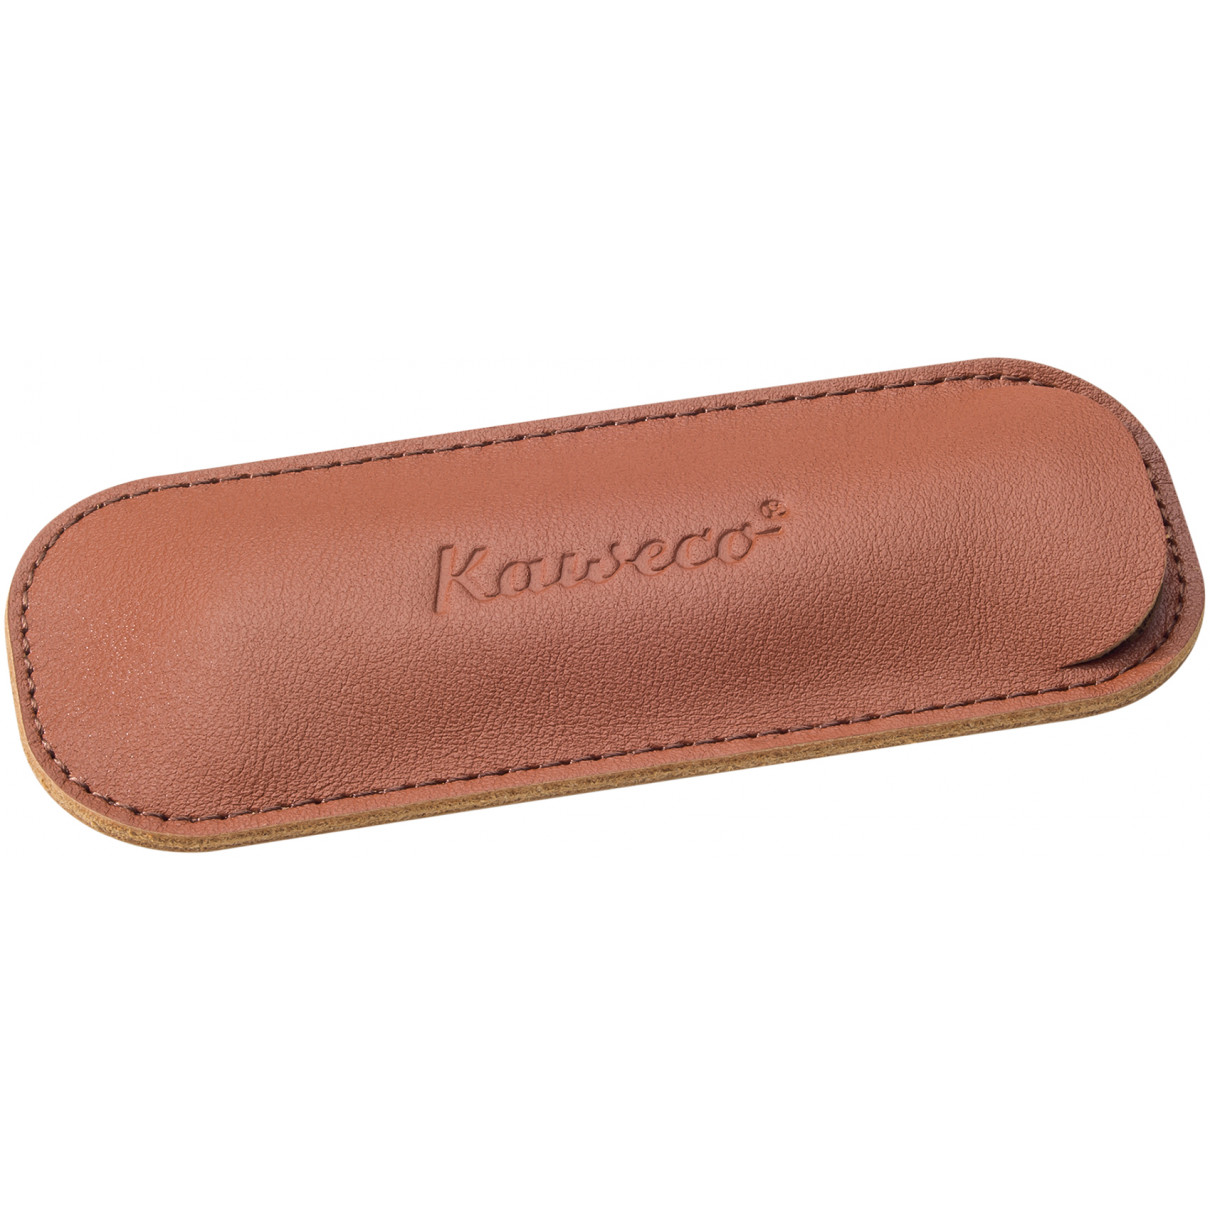 Kaweco Eco Leather Pouch for Sport Pens - Brandy - Double